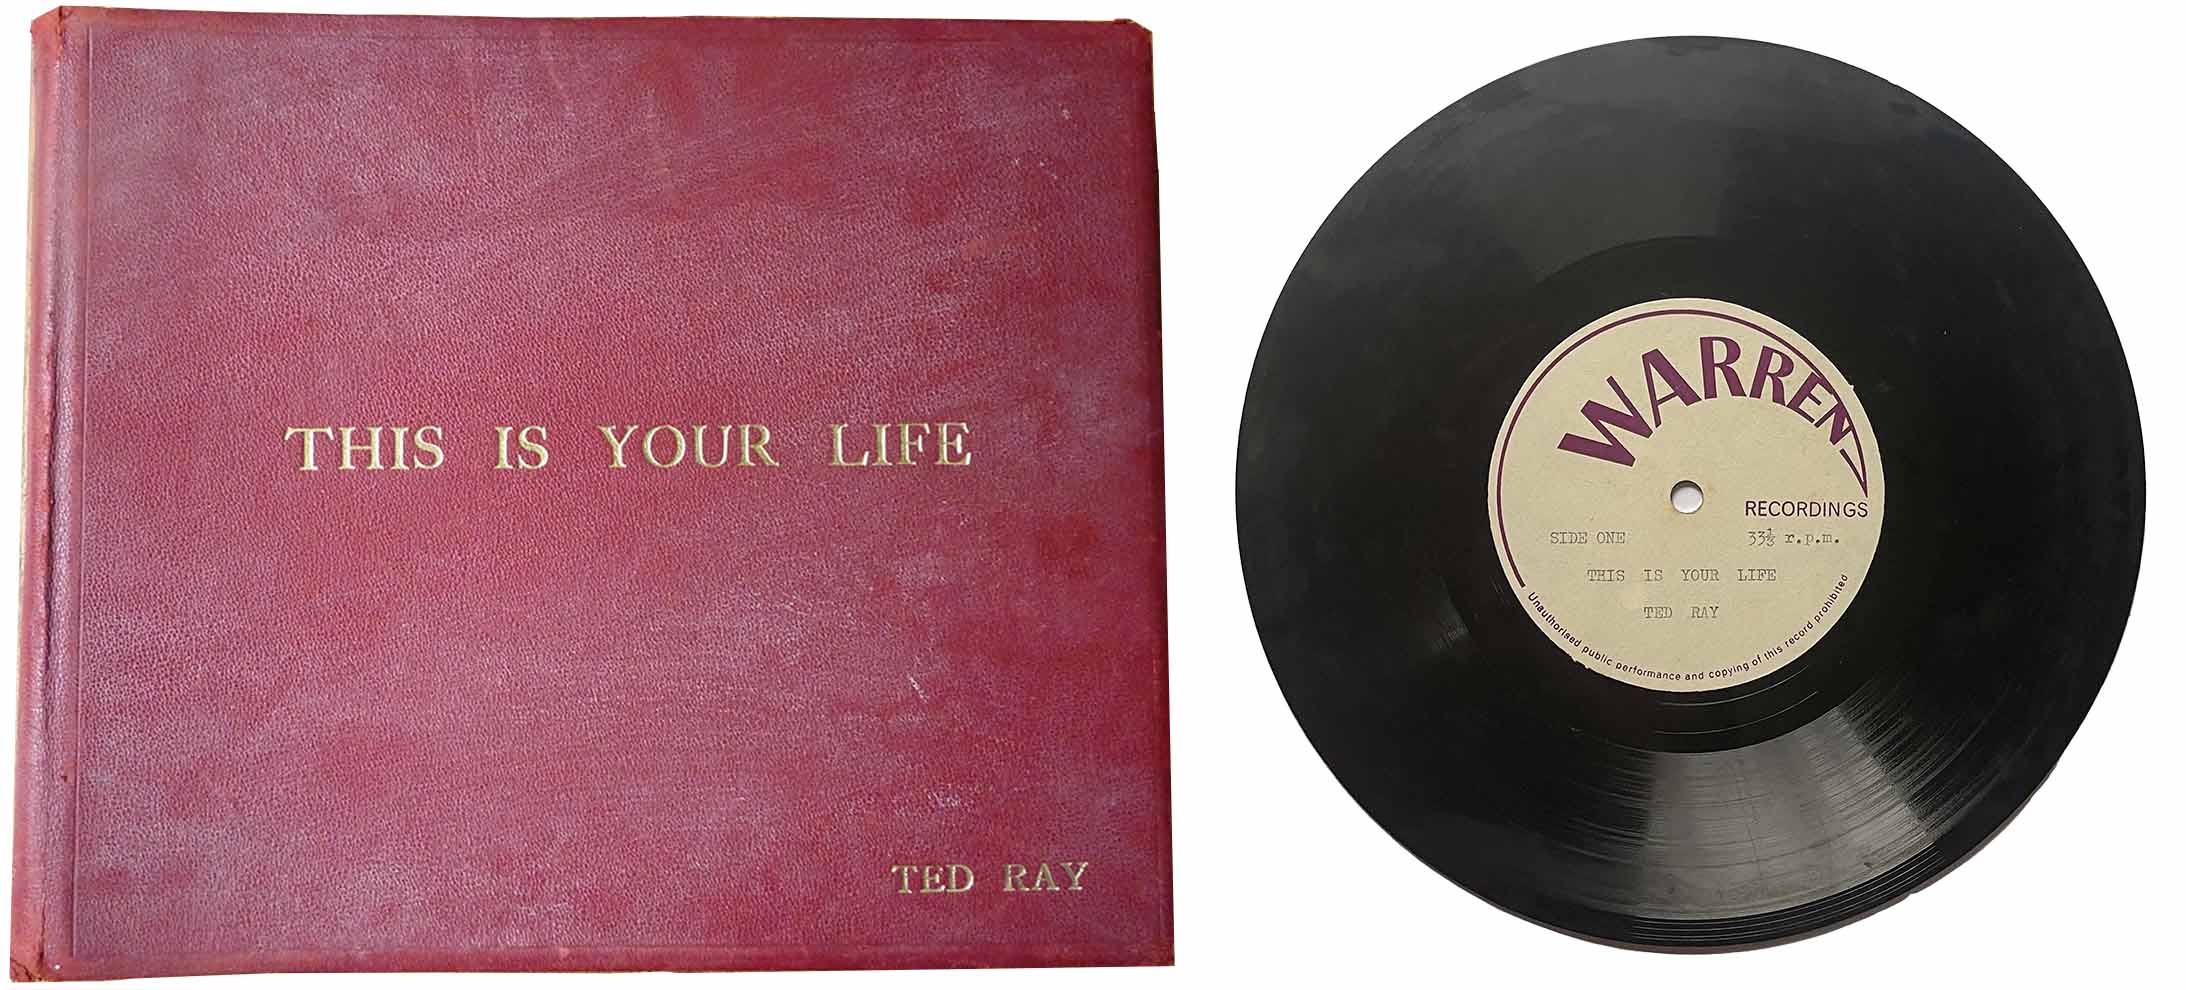 Ted Ray's This Is Your Life book and audio recording